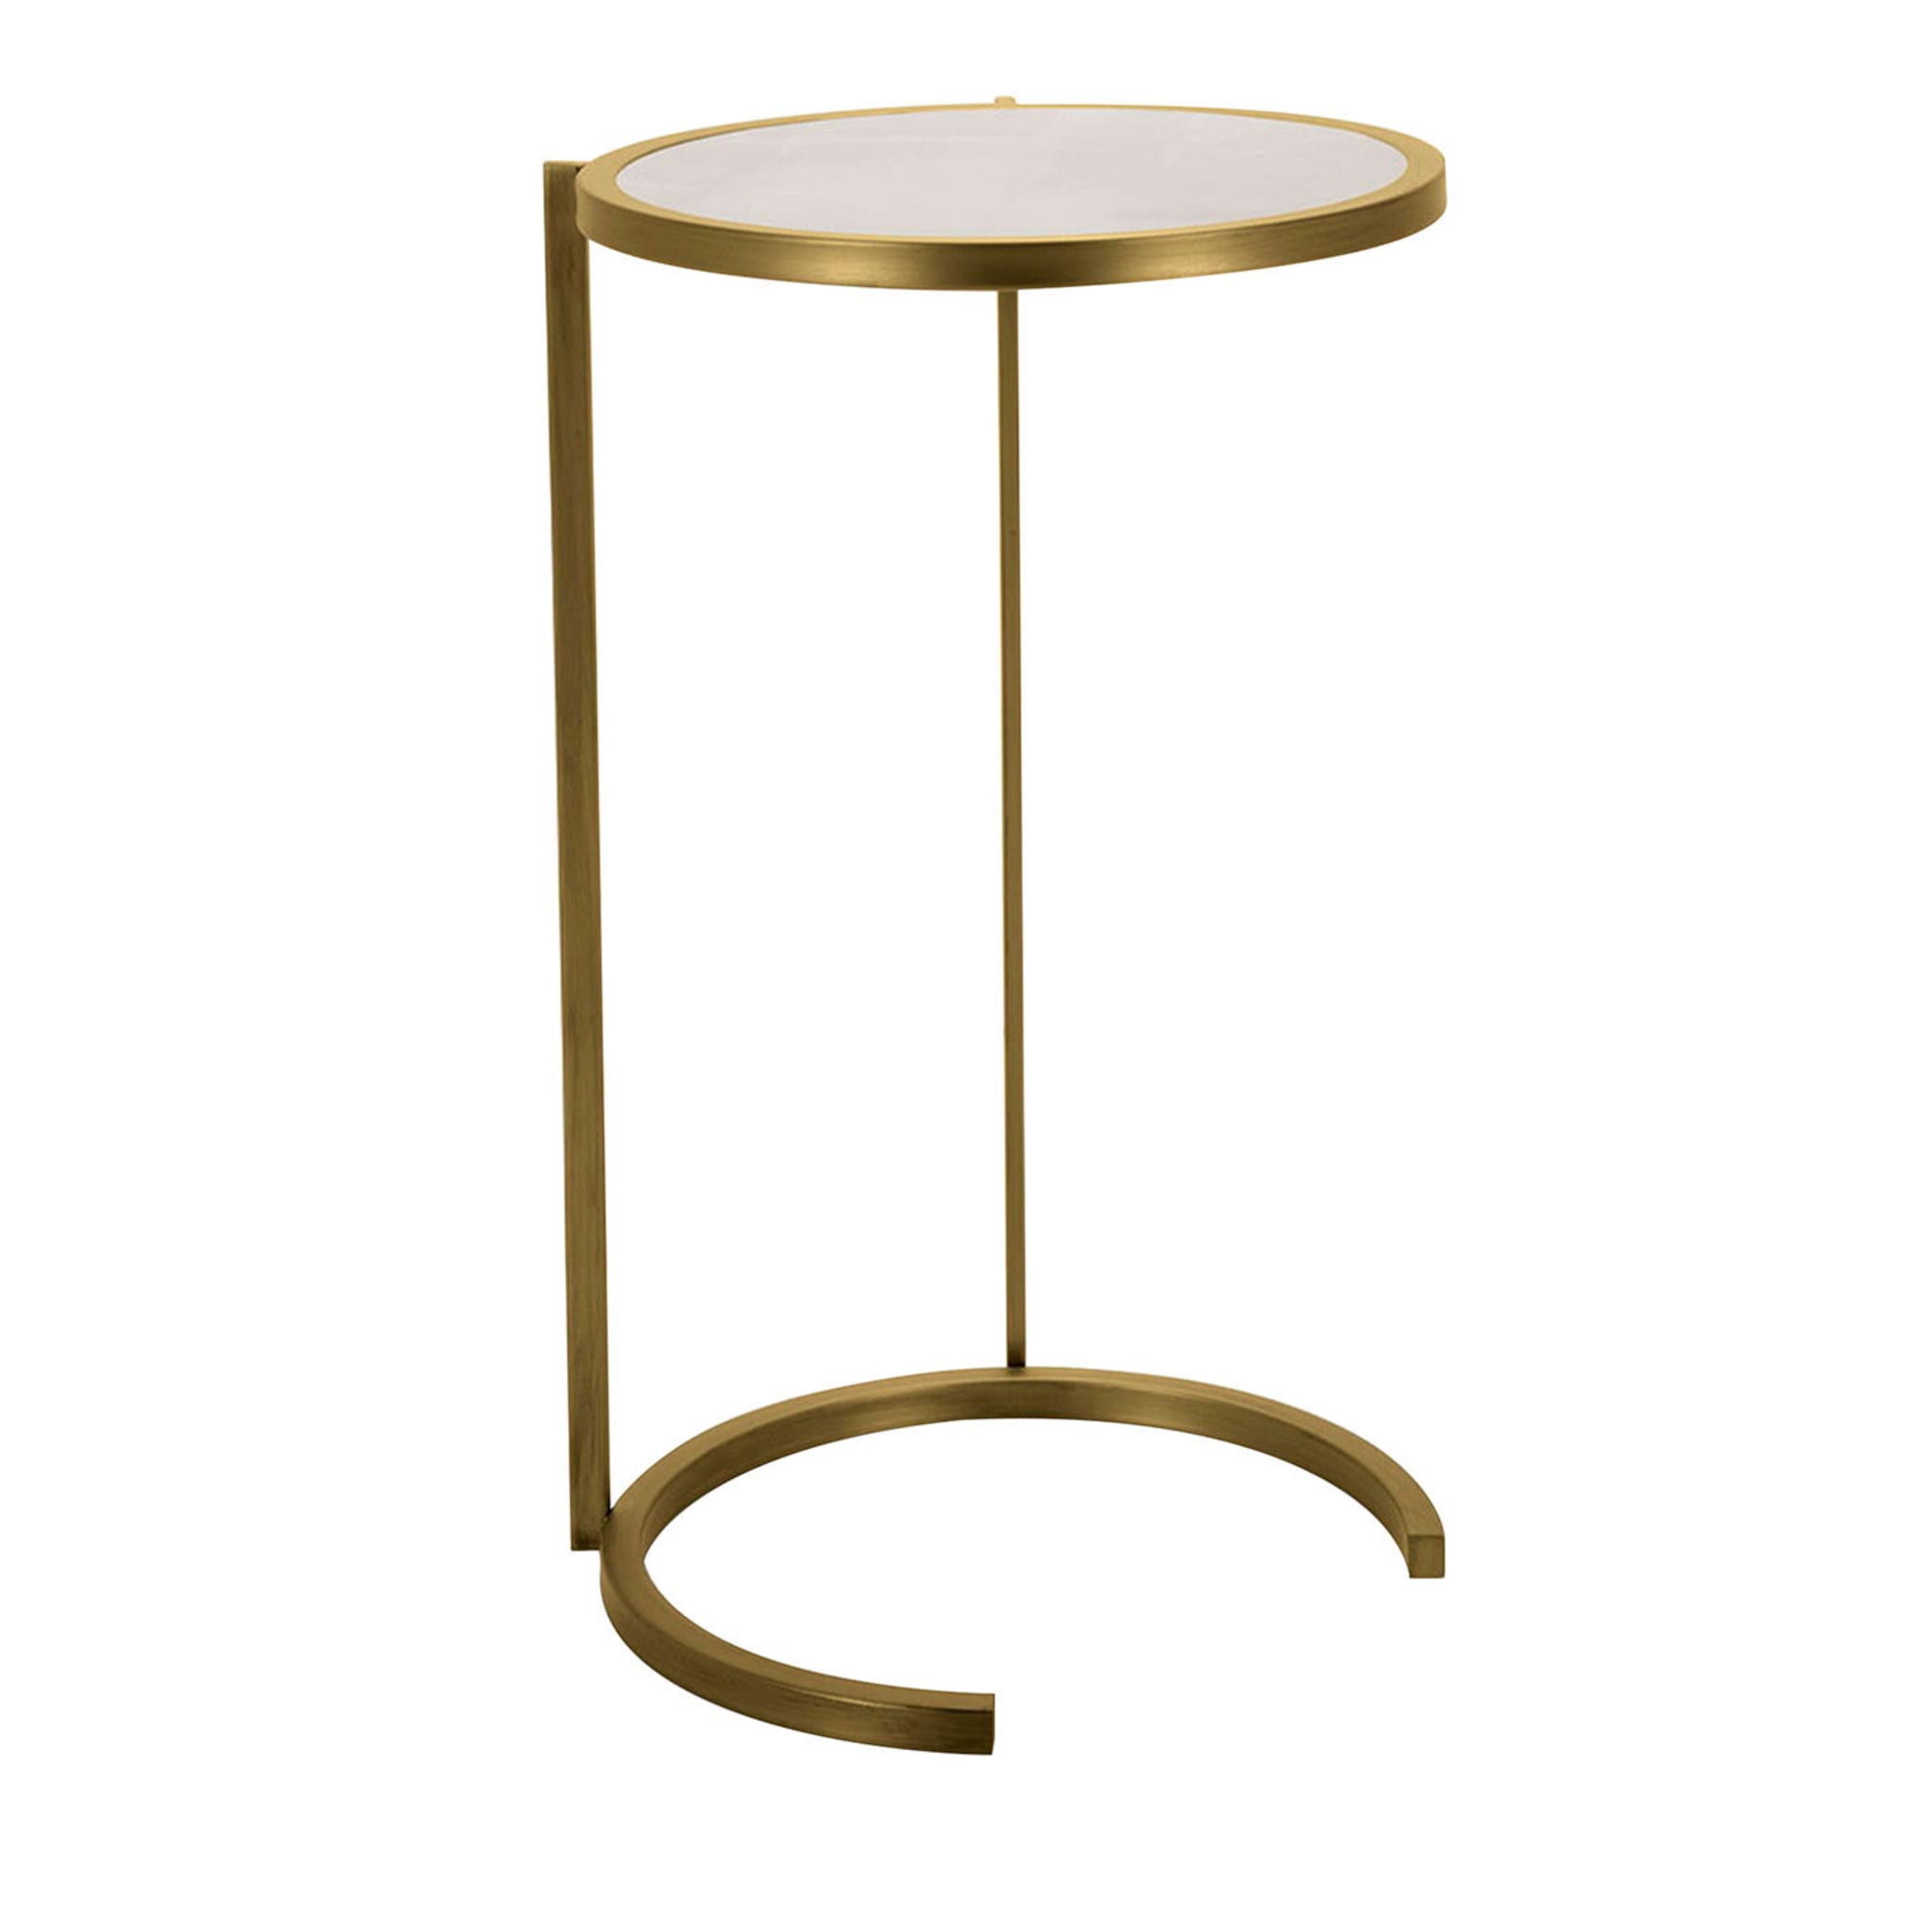 Teti Burnished Brass Accent Table  - Alternative view 1